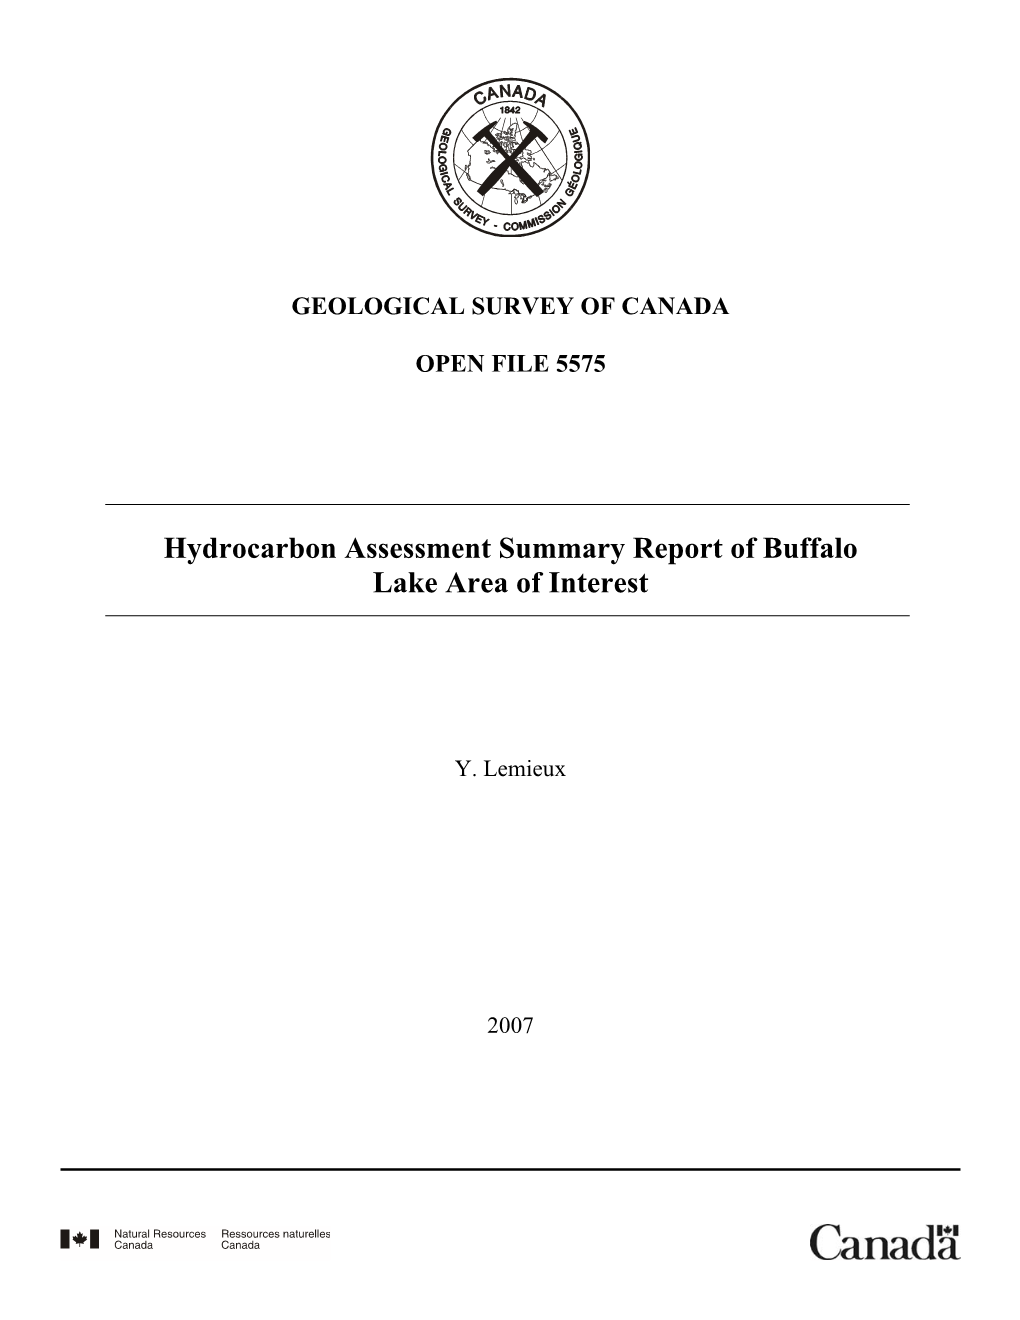 Hydrocarbon Assessment Summary Report of Buffalo Lake Area of Interest